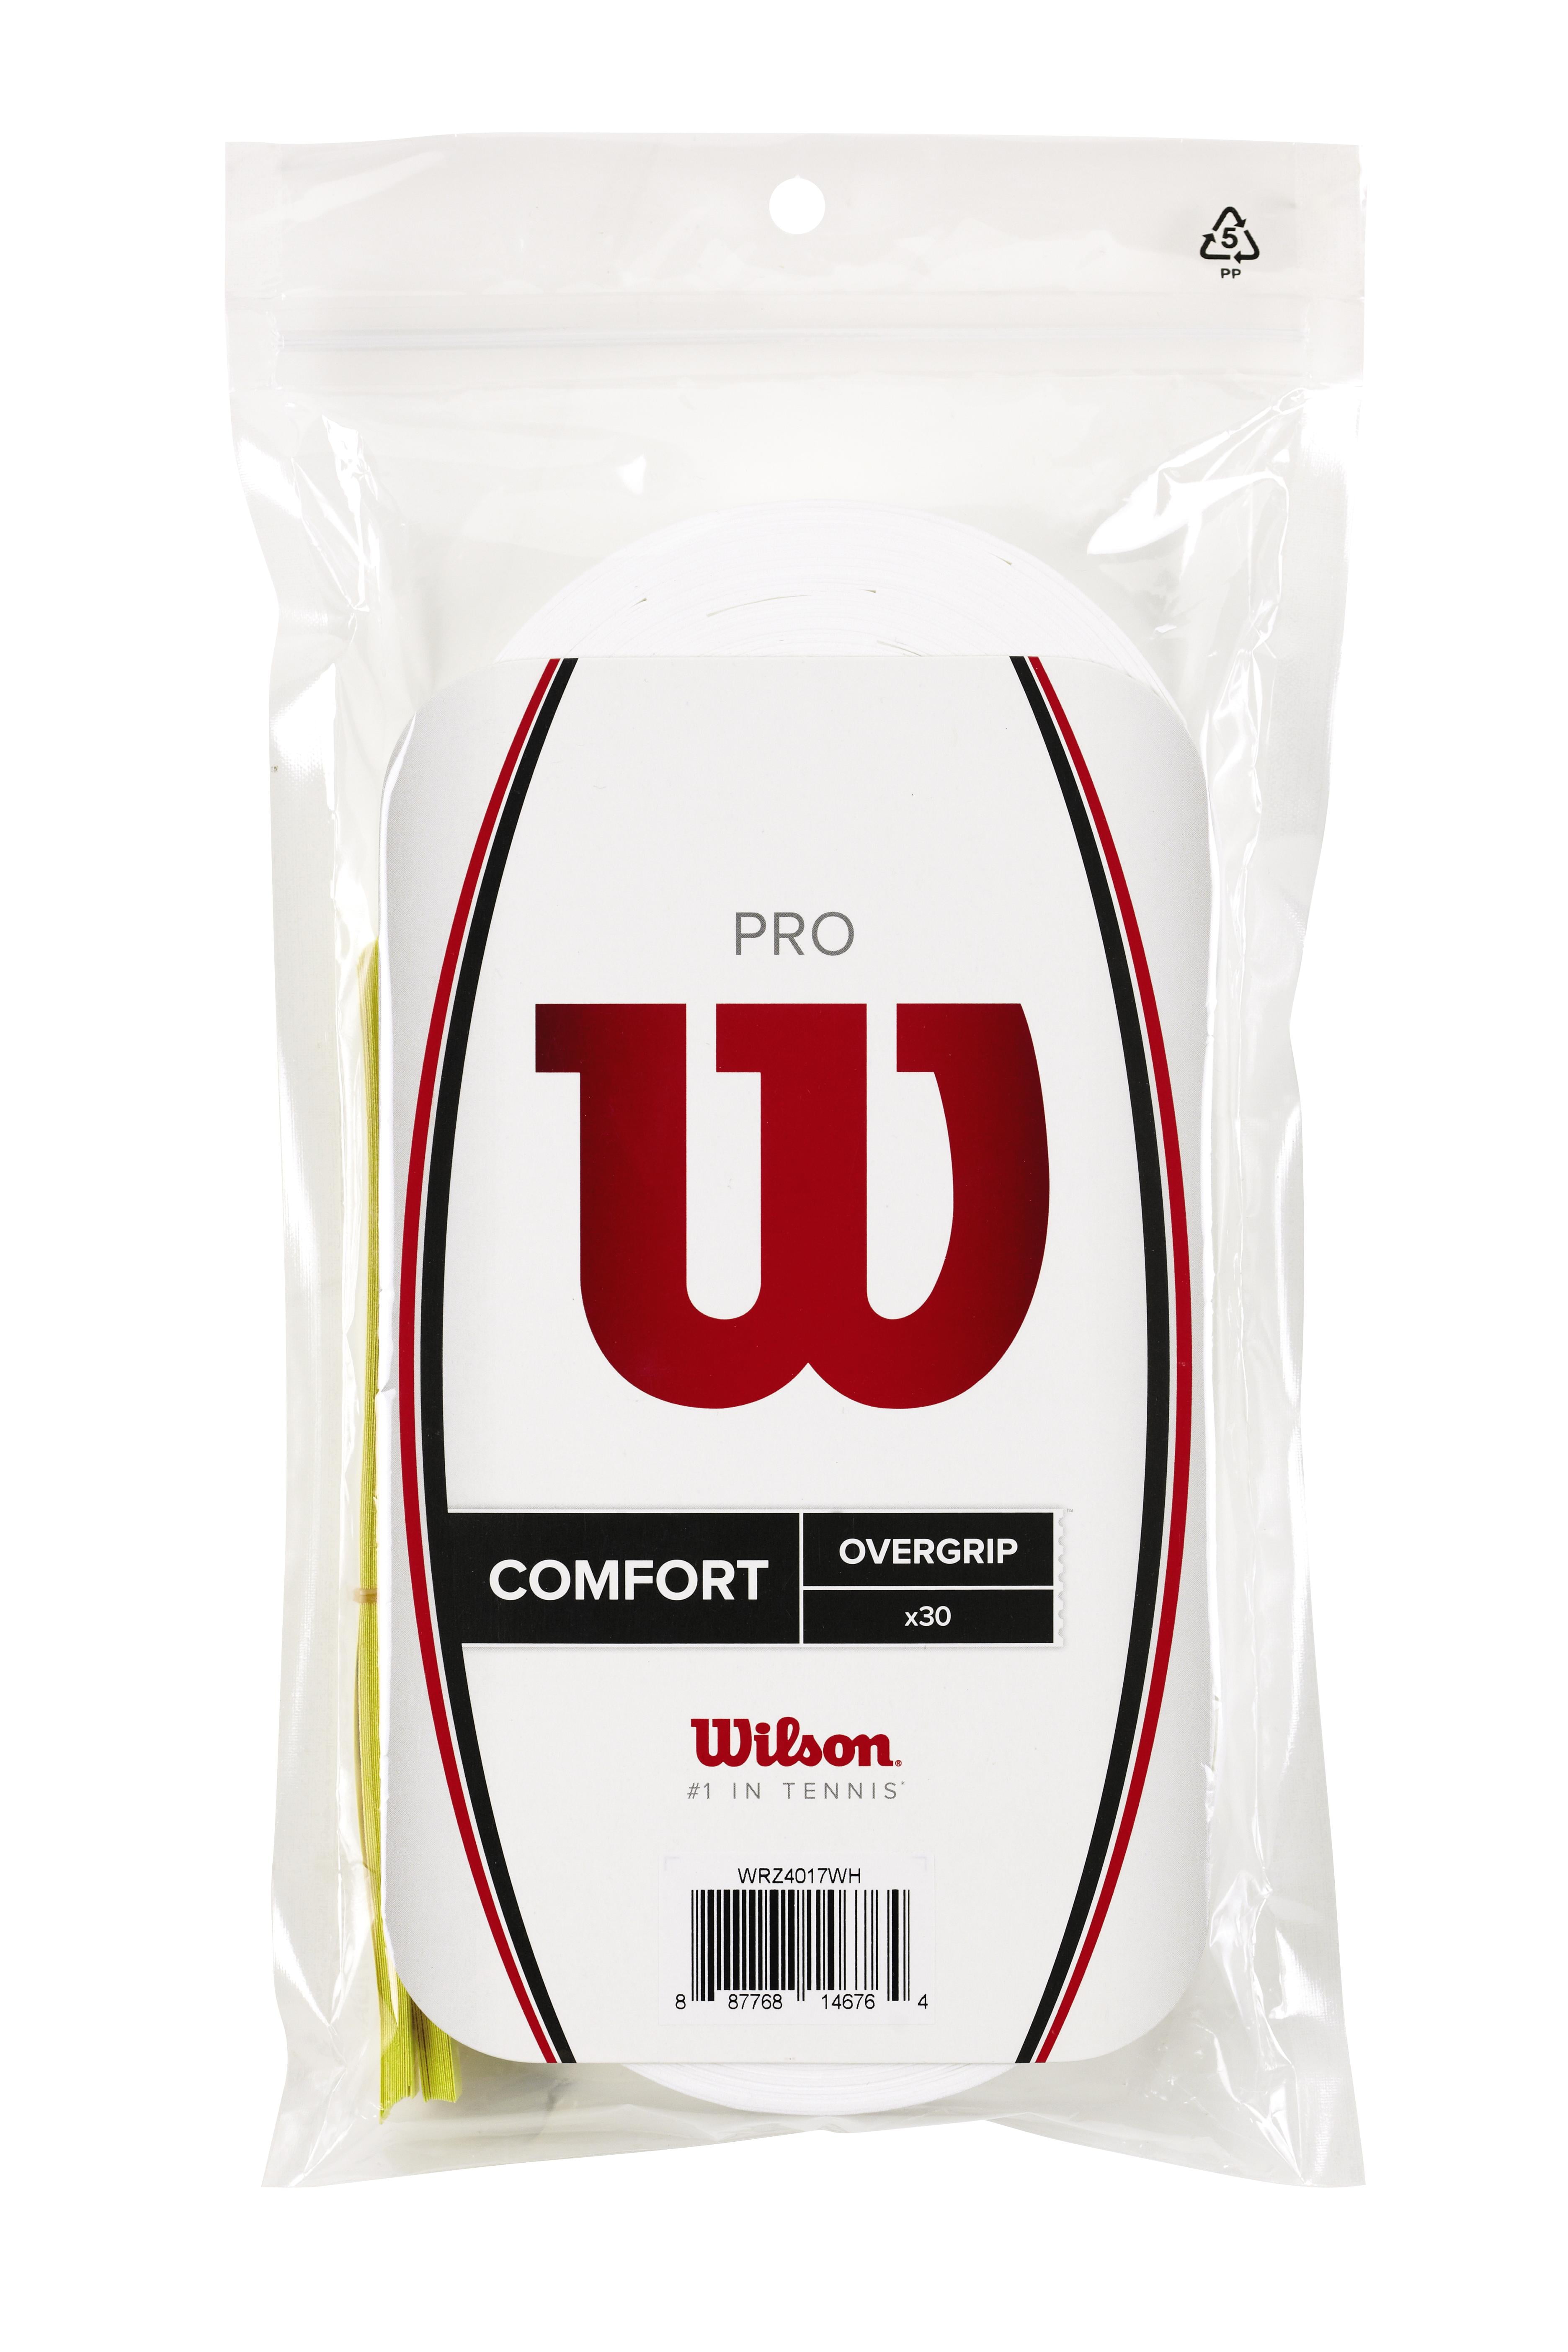 Wilson Pro Overgrip Pink Grip To Improve Your Game single/double/triple 